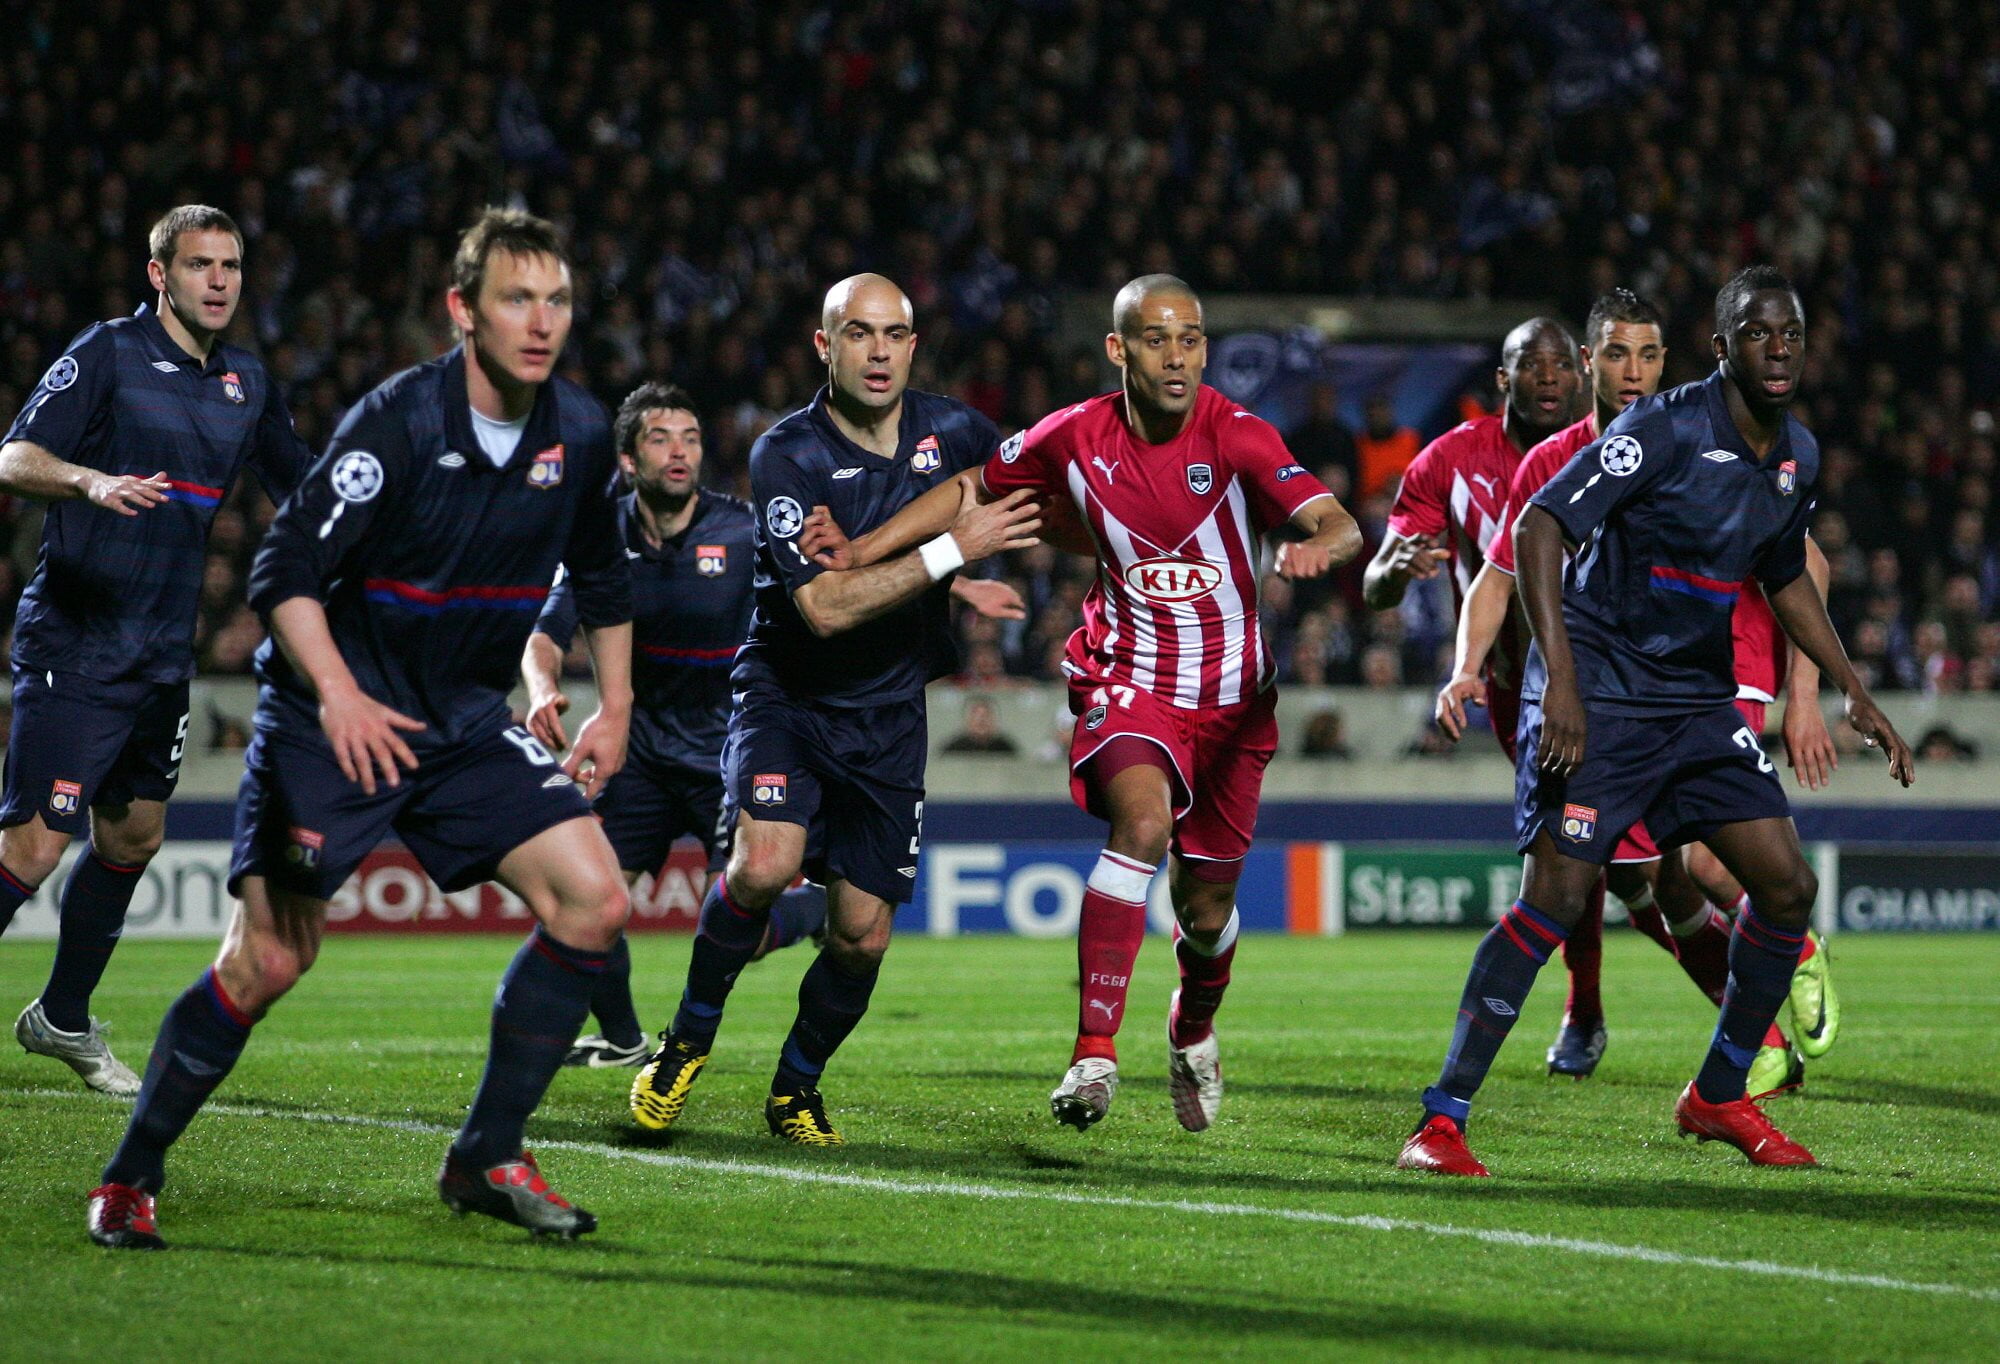 Players from Olympique Lyonnais and Girondins de Bordeaux face off in the UEFA Champions League